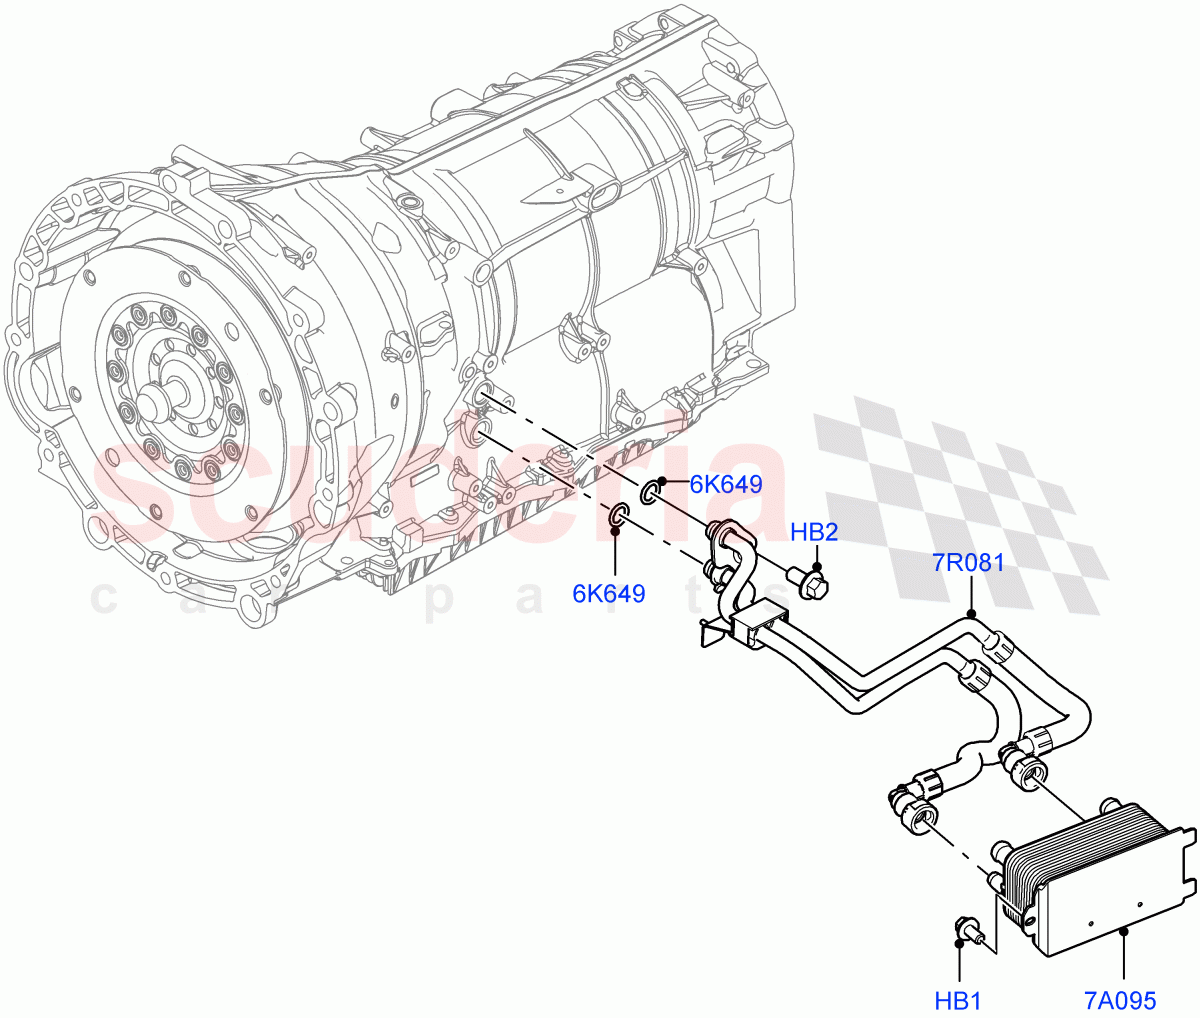 Transmission Cooling Systems(Nitra Plant Build)(3.0L AJ20P6 Petrol High,8 Speed Auto Trans ZF 8HP76,3.0L AJ20D6 Diesel High) of Land Rover Land Rover Discovery 5 (2017+) [3.0 DOHC GDI SC V6 Petrol]